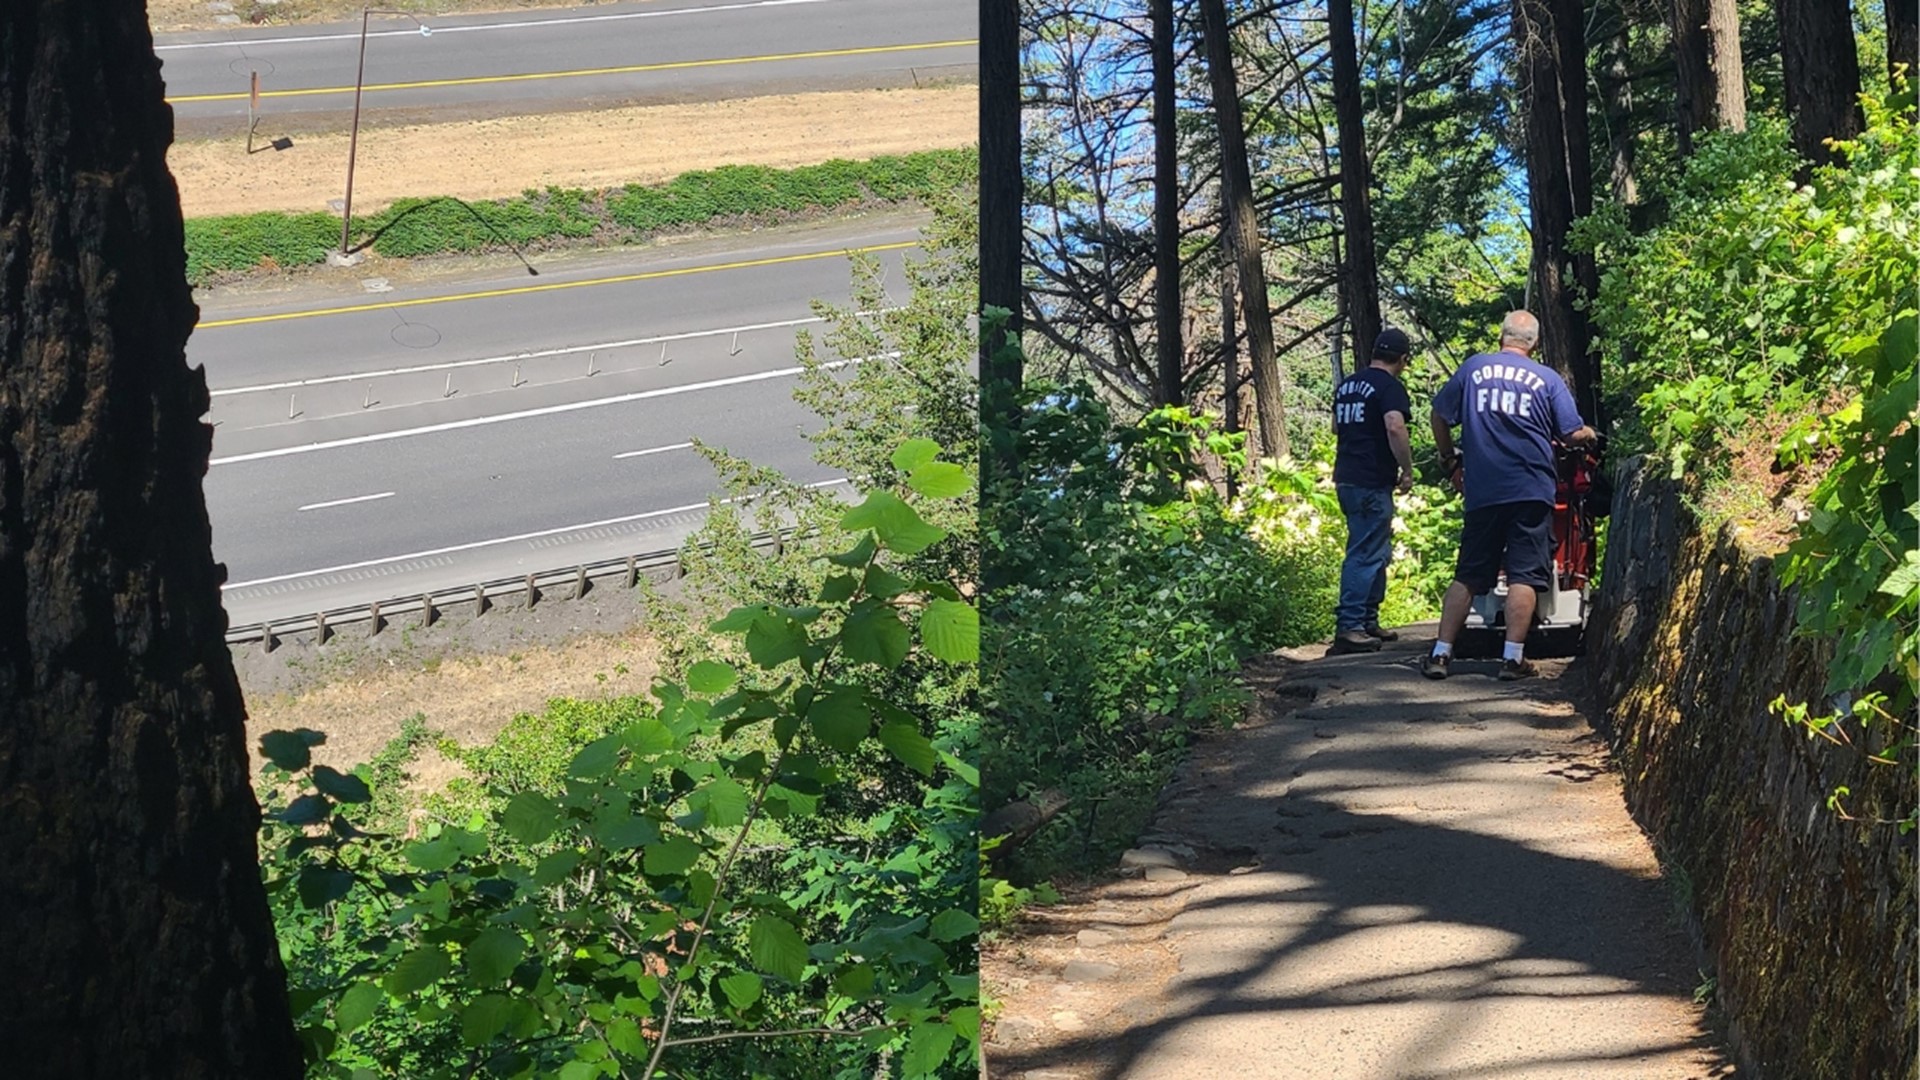 A man fell while hiking at Multnomah Falls in the Columbia River Gorge early Saturday afternoon. He did not survive his injuries, according to authorities.